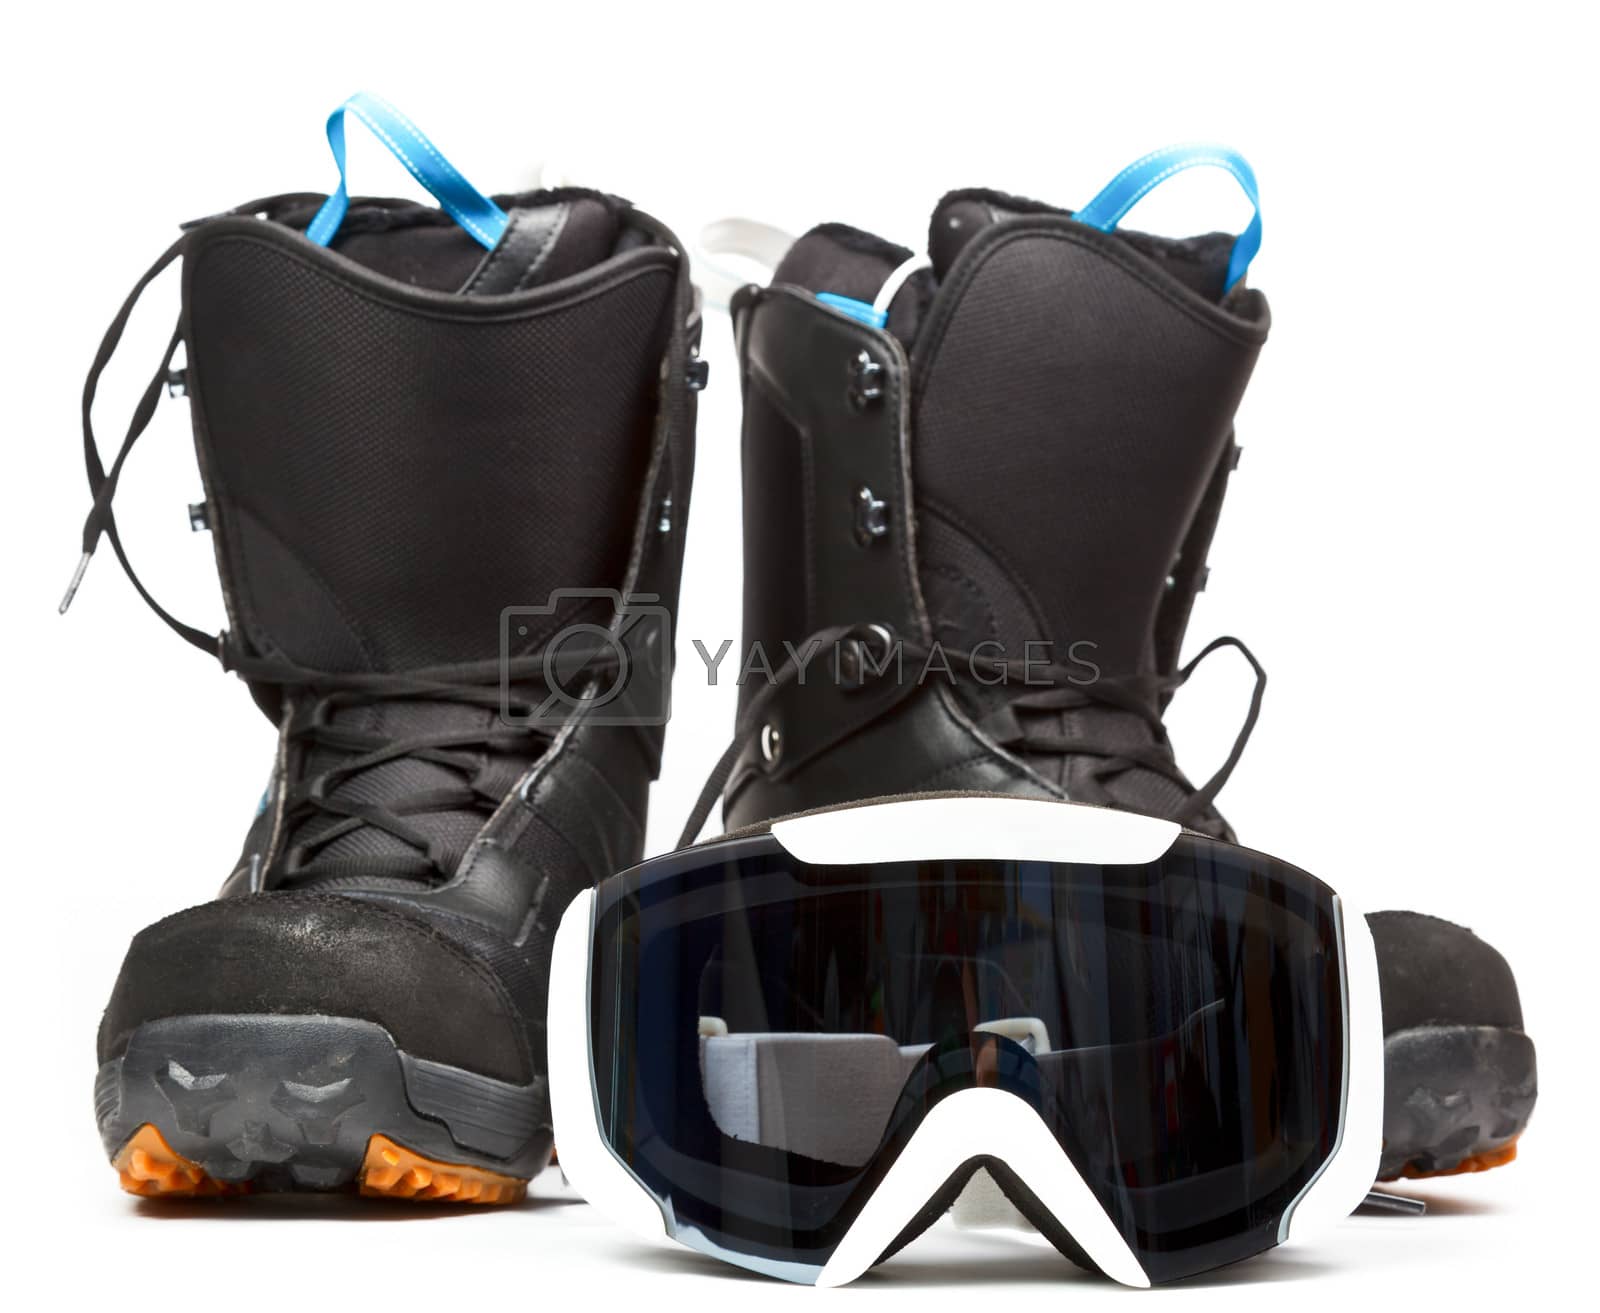 Royalty free image of Snowboarding equipment by naumoid